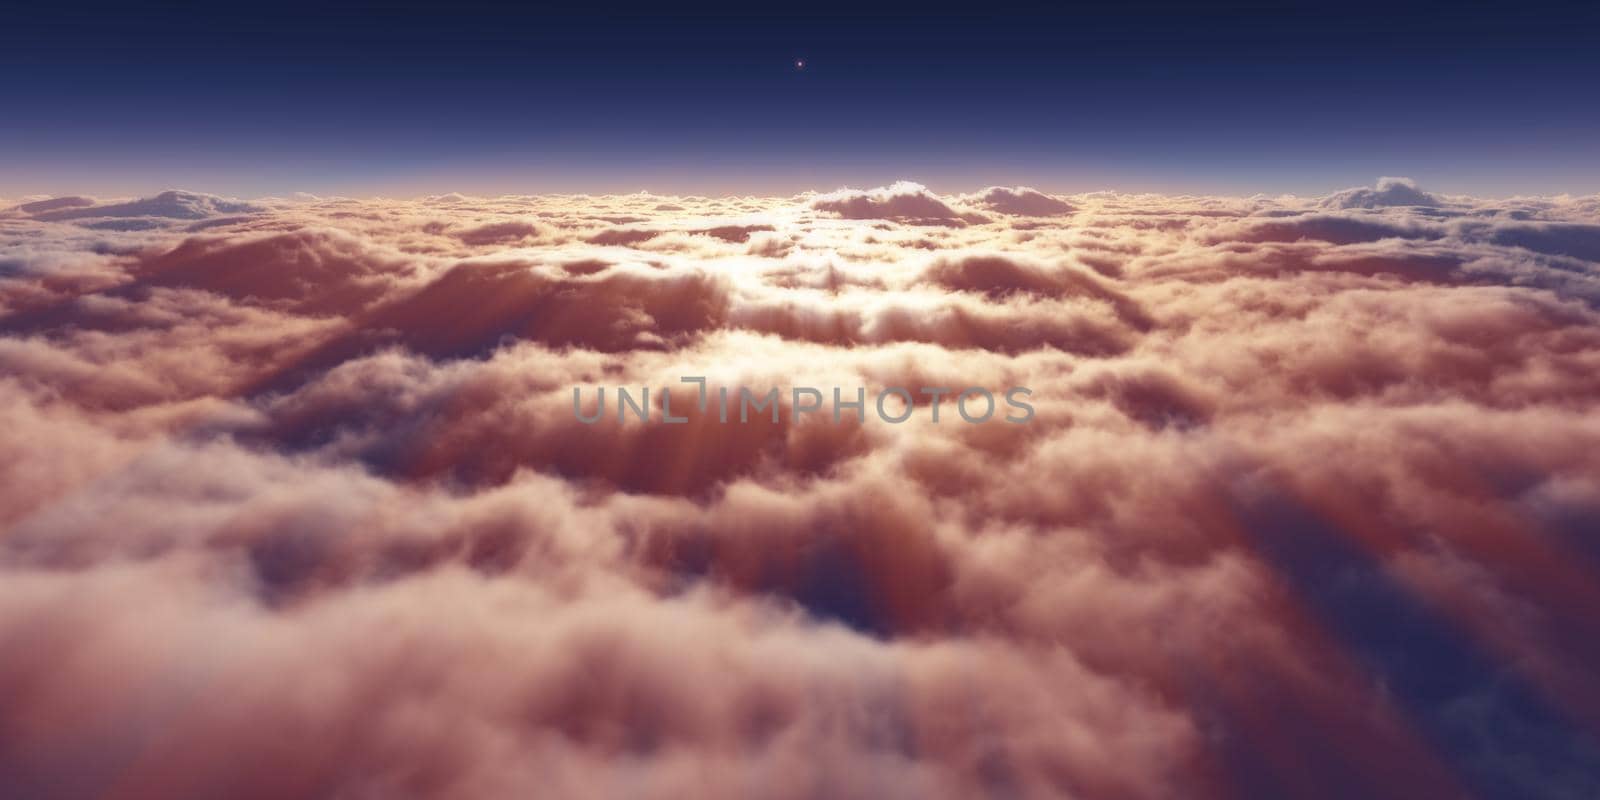 dream fly above clouds ray light, 3d rendering illustration